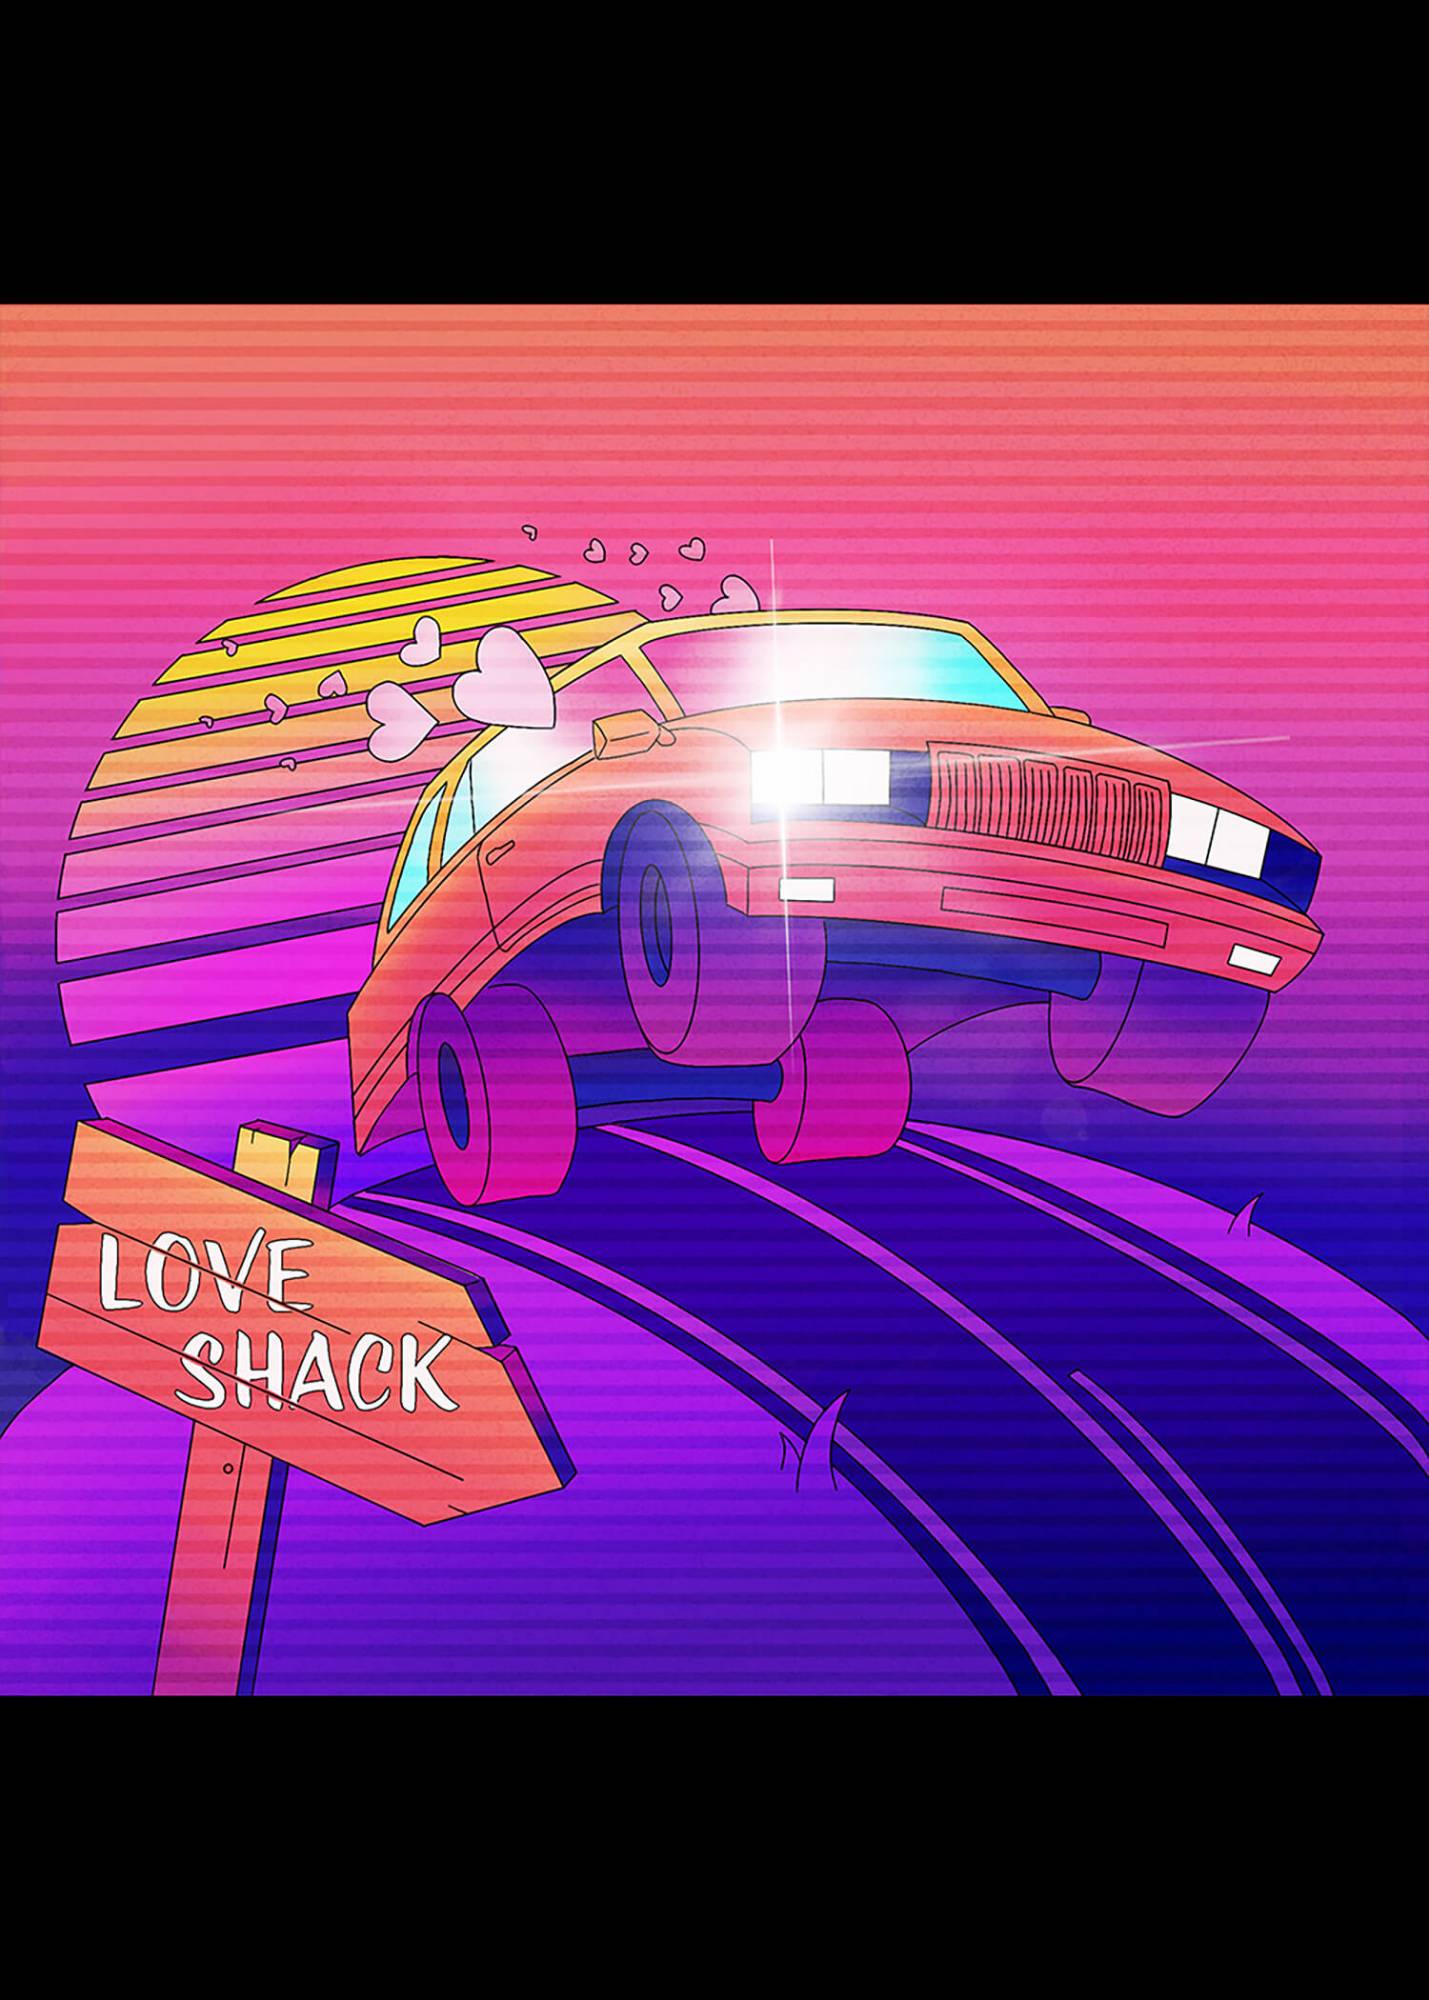 Car coming over a hill in vaporware aesthetic with gradient of purple, pink and orange.